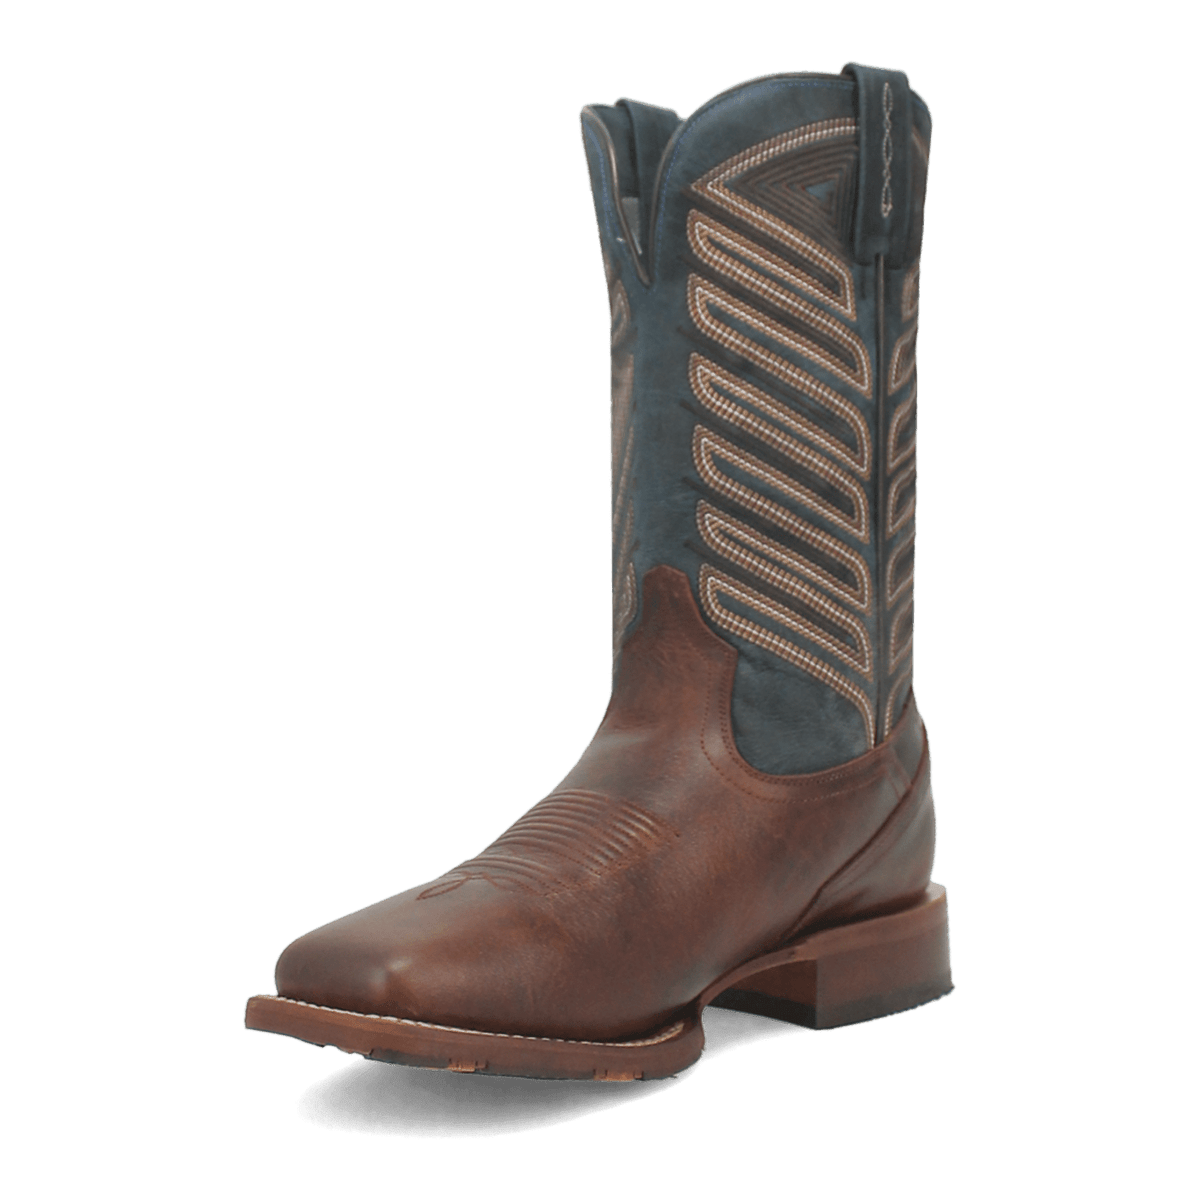 IVAN LEATHER BOOT Image